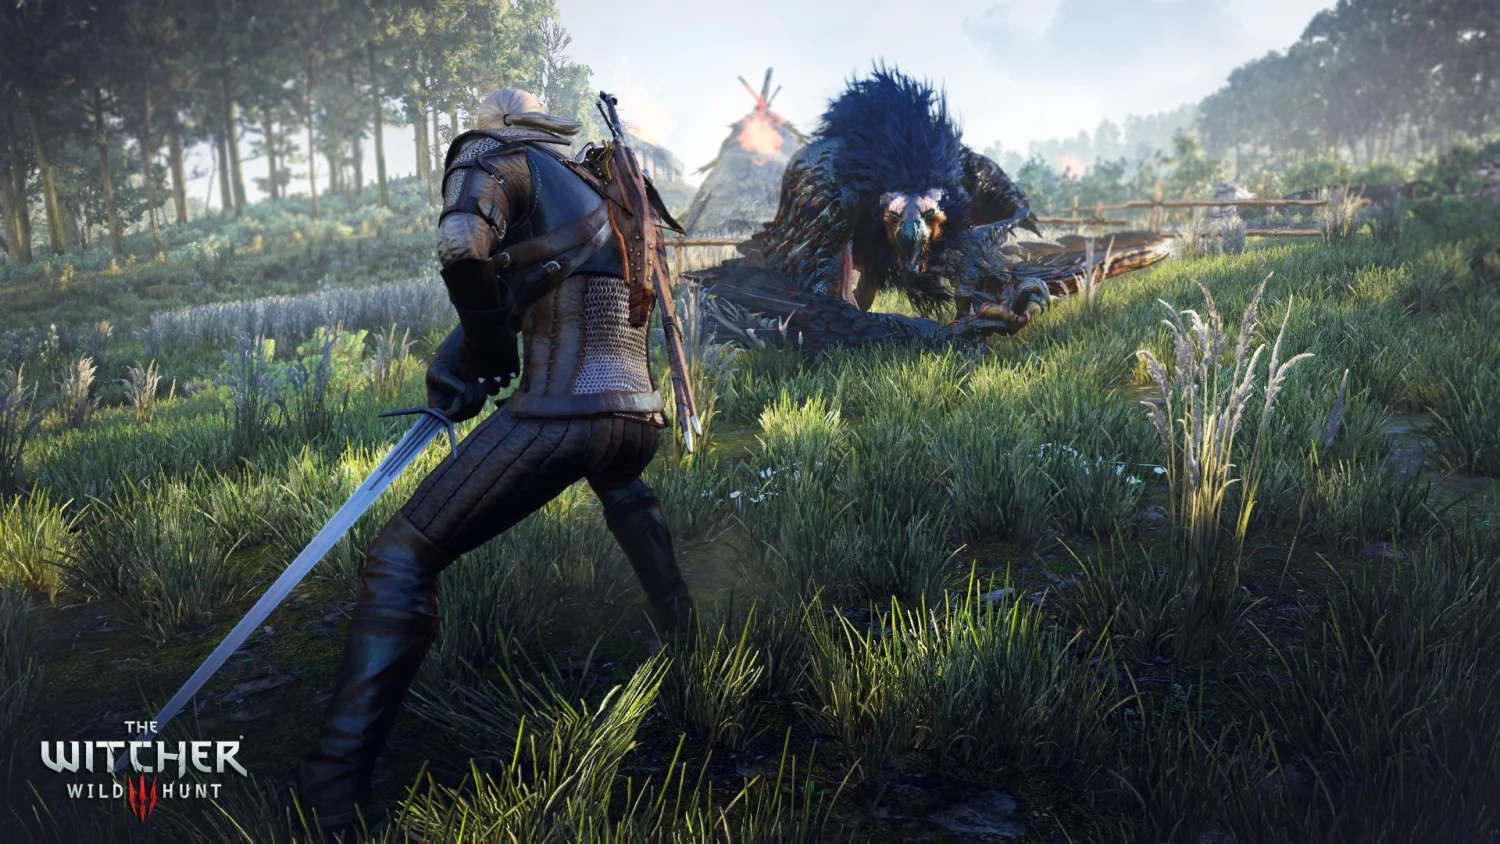 Jogo The Witcher 3 Game of the year PS4